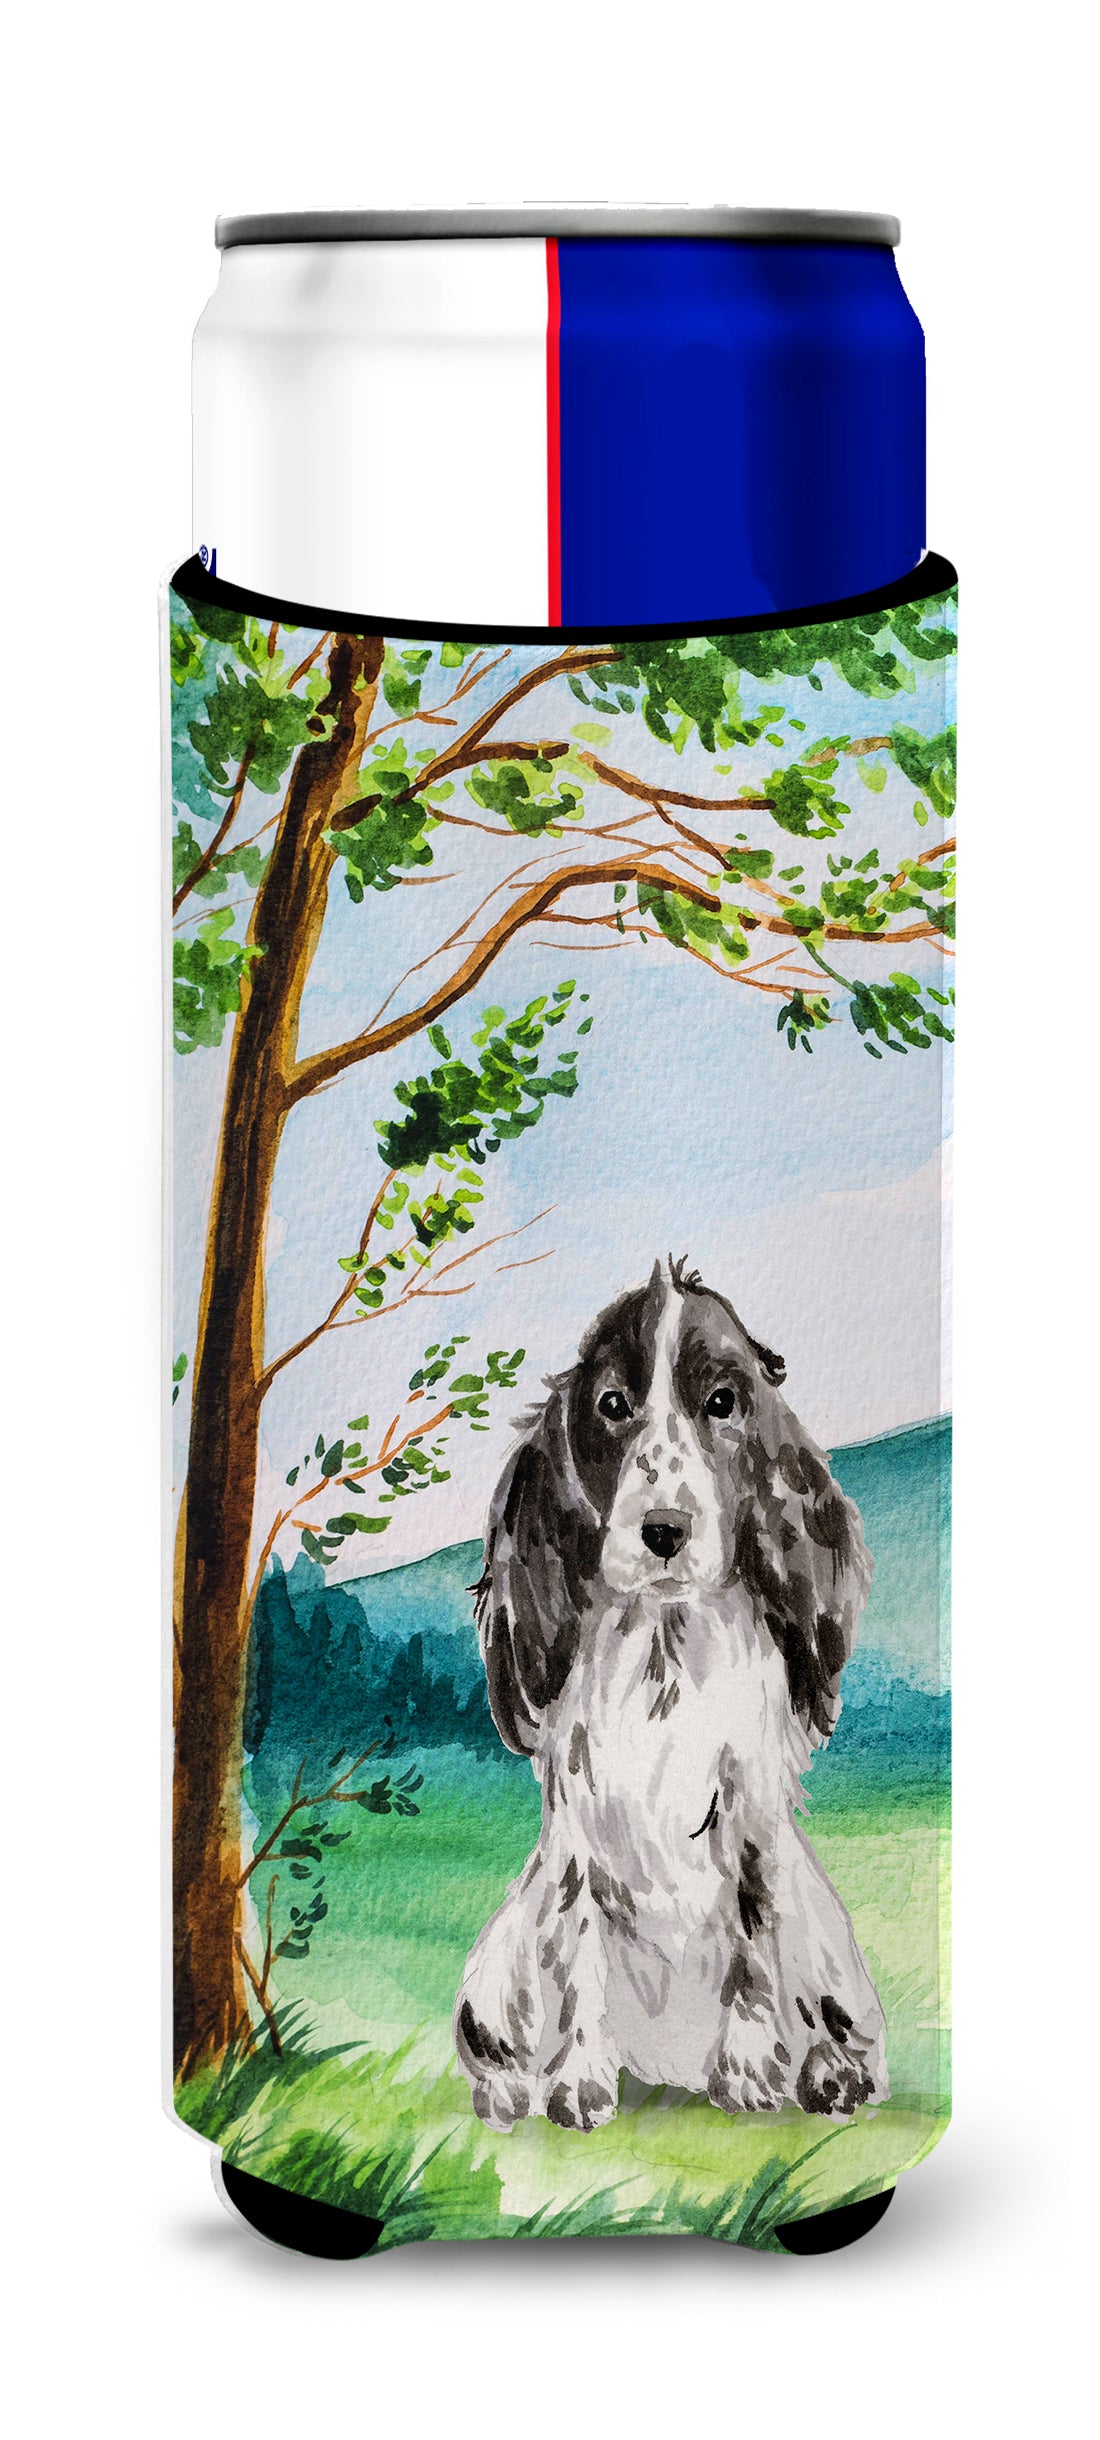 Under the Tree Black Parti Cocker Spaniel  Ultra Hugger for slim cans CK2017MUK  the-store.com.